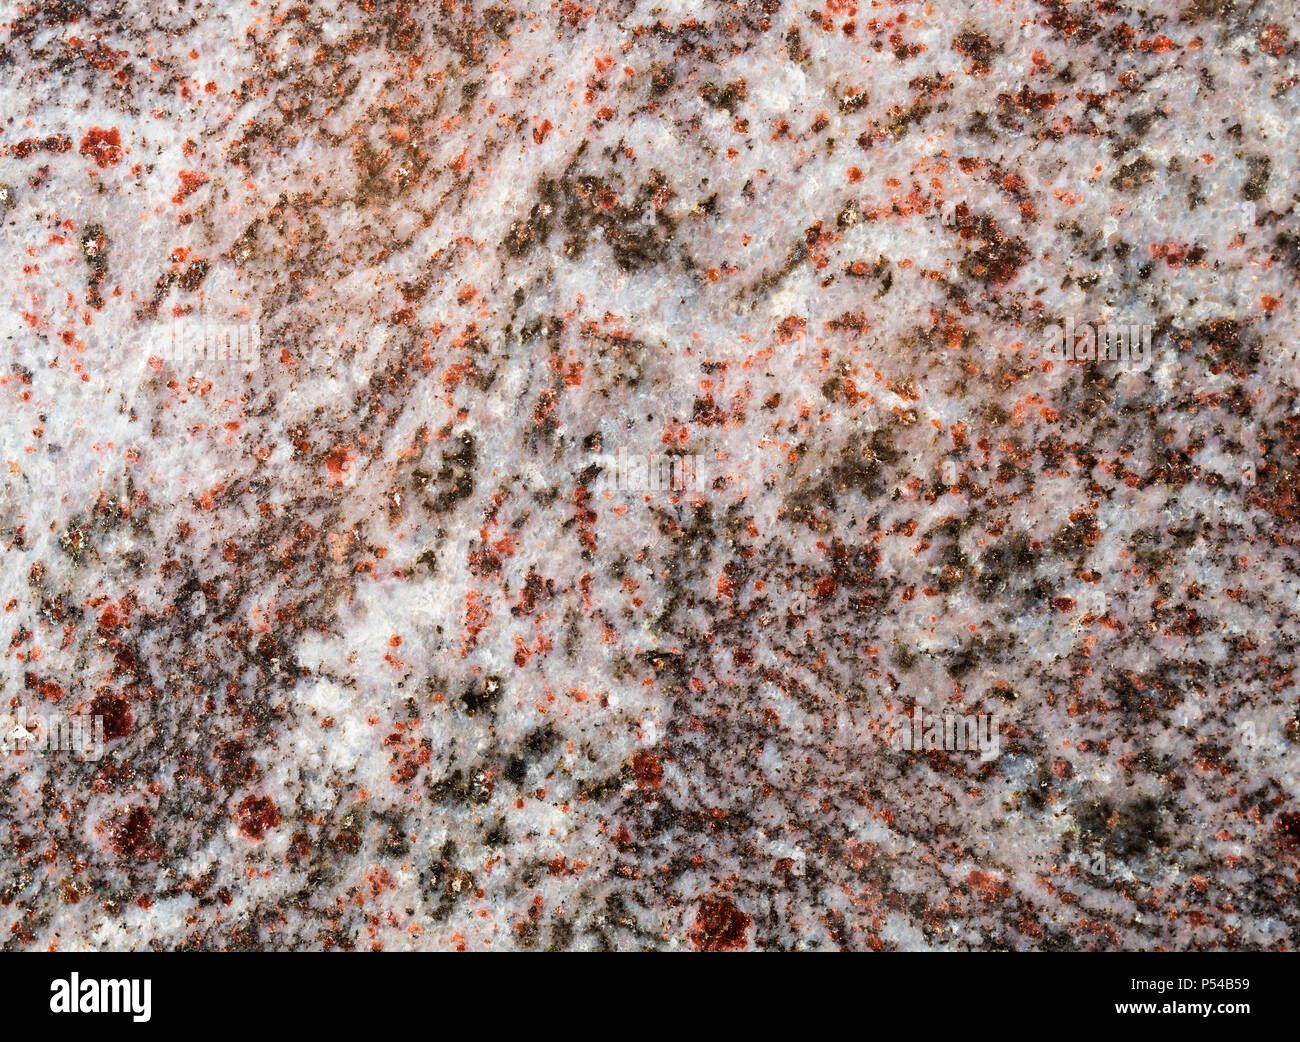 Close up of Granite surface, background image Stock Photo